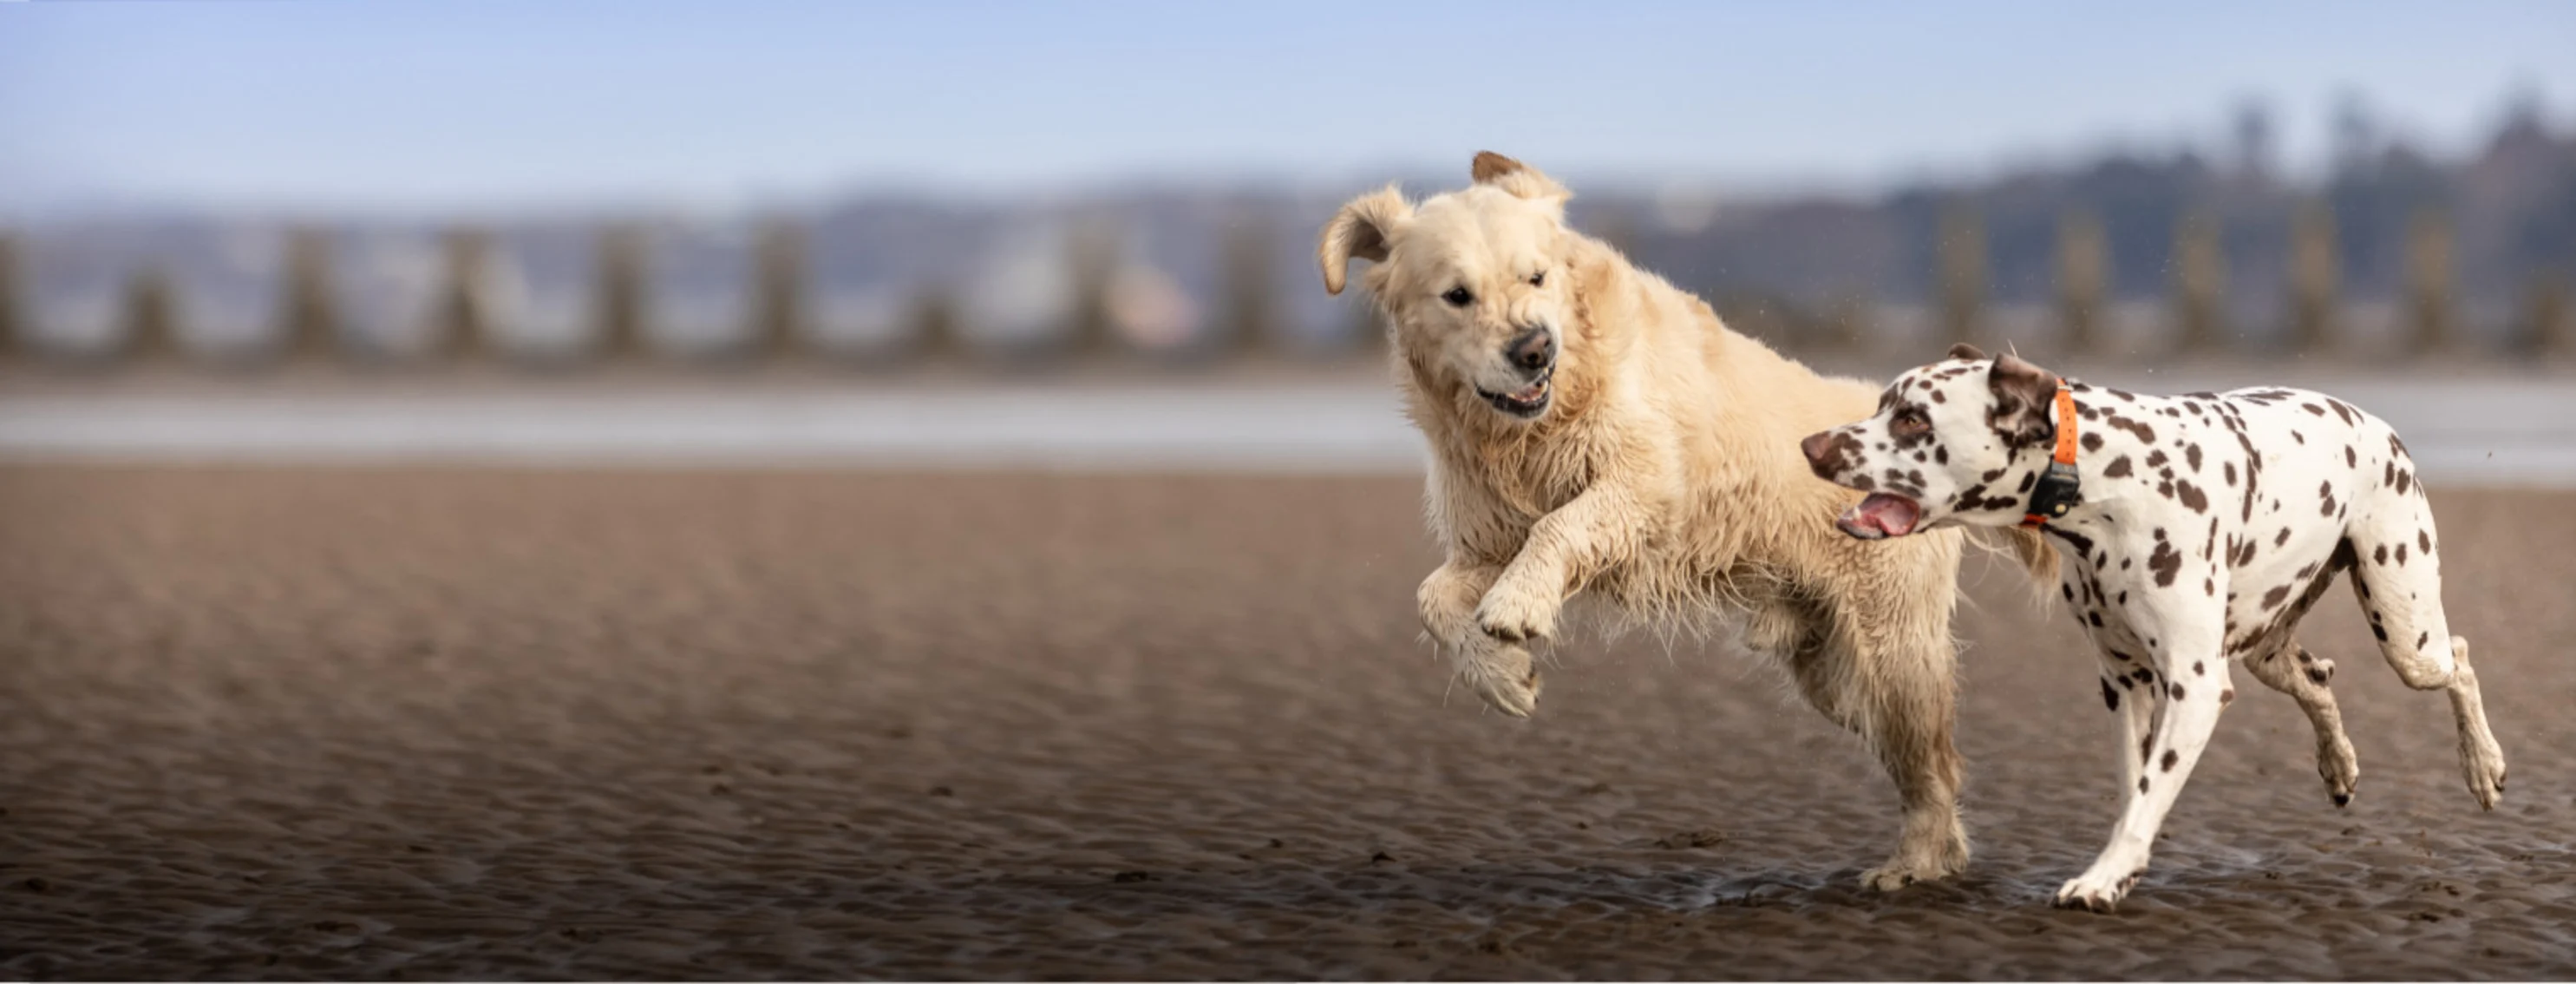 Two Dogs Running on Sand